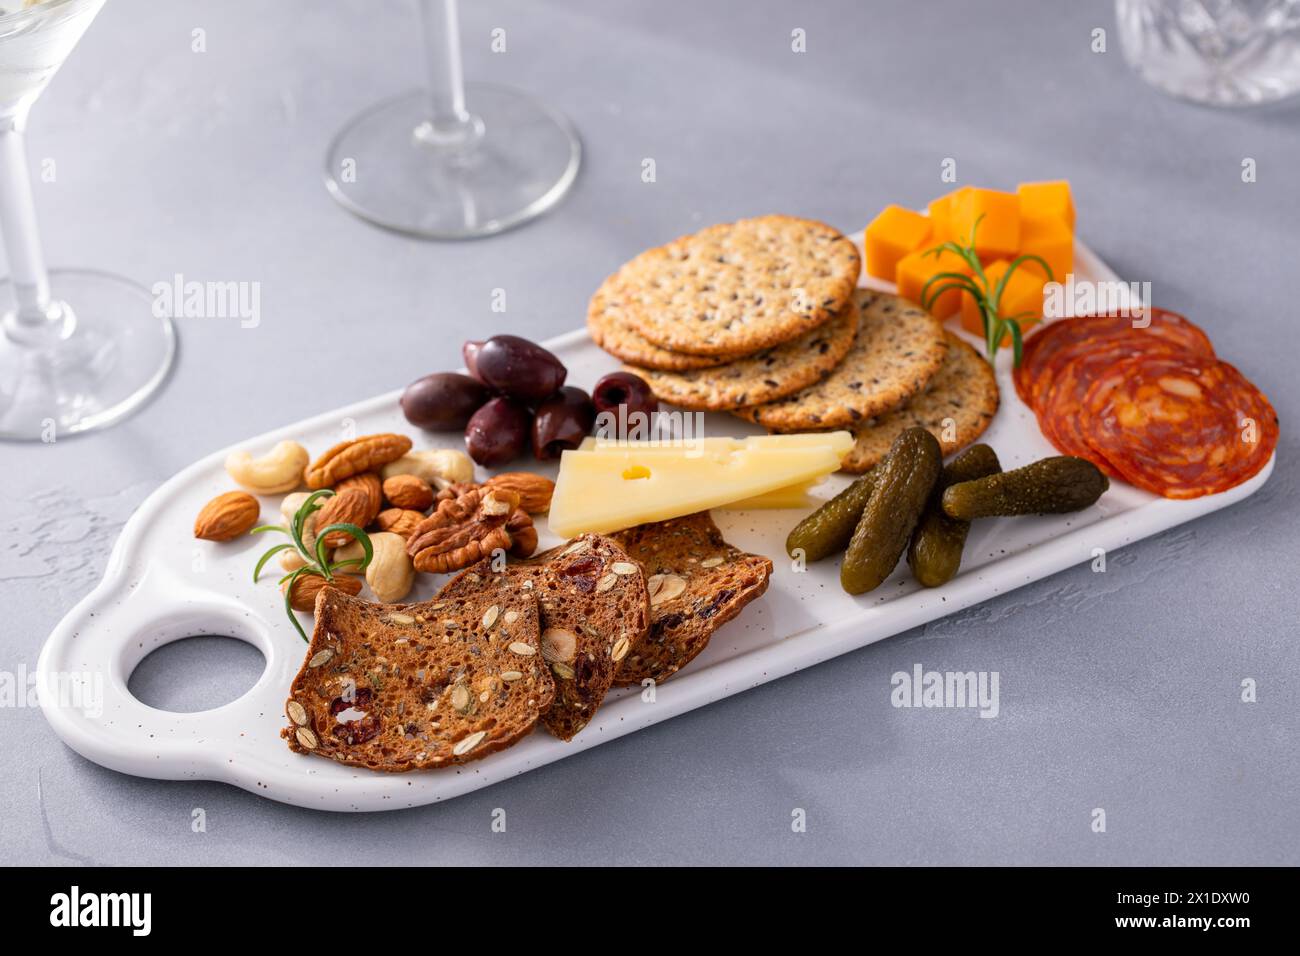 Small charcuterie or cheese board for two served with martinis Stock Photo